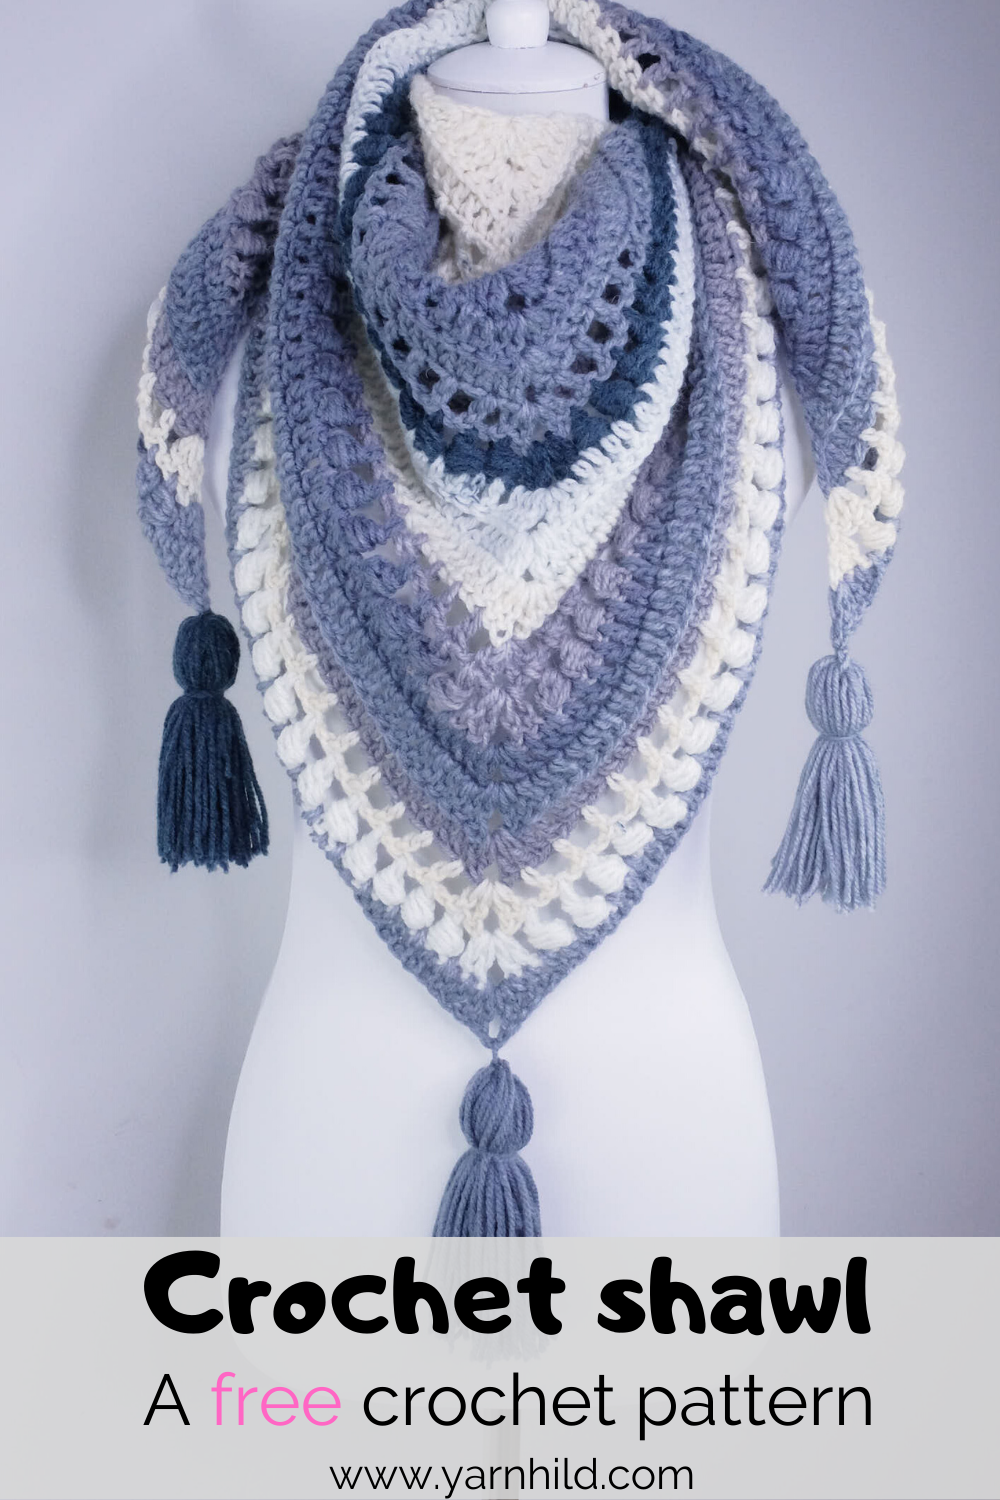 How to crochet a shawl - The Pearl Shawl - Easy and quick to make!